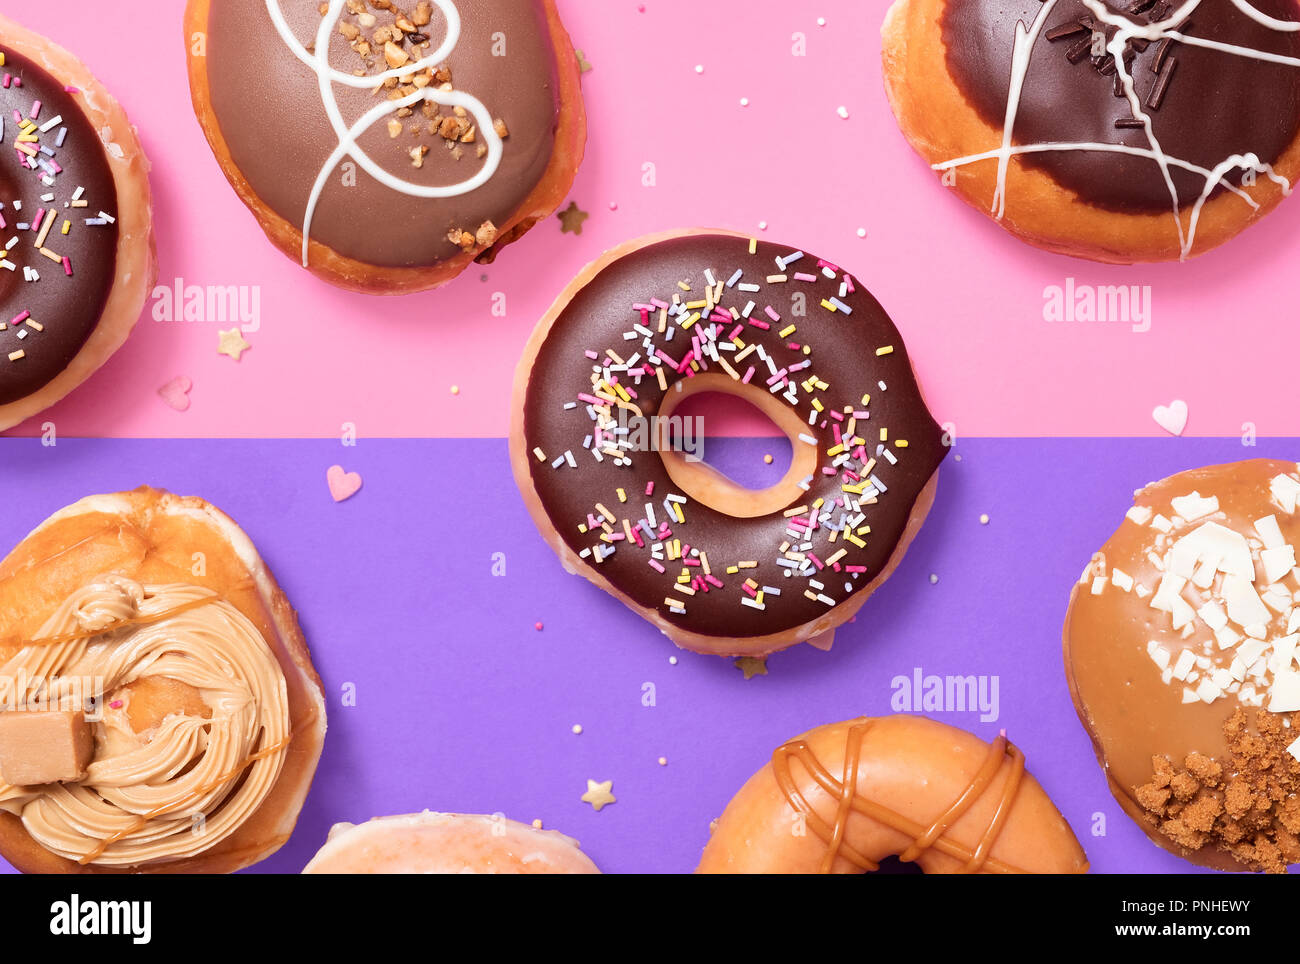 Assorted donuts on a split pink and purple pastel background with a classic chocolate ring and sprinkles donuts in the middle. Stock Photo